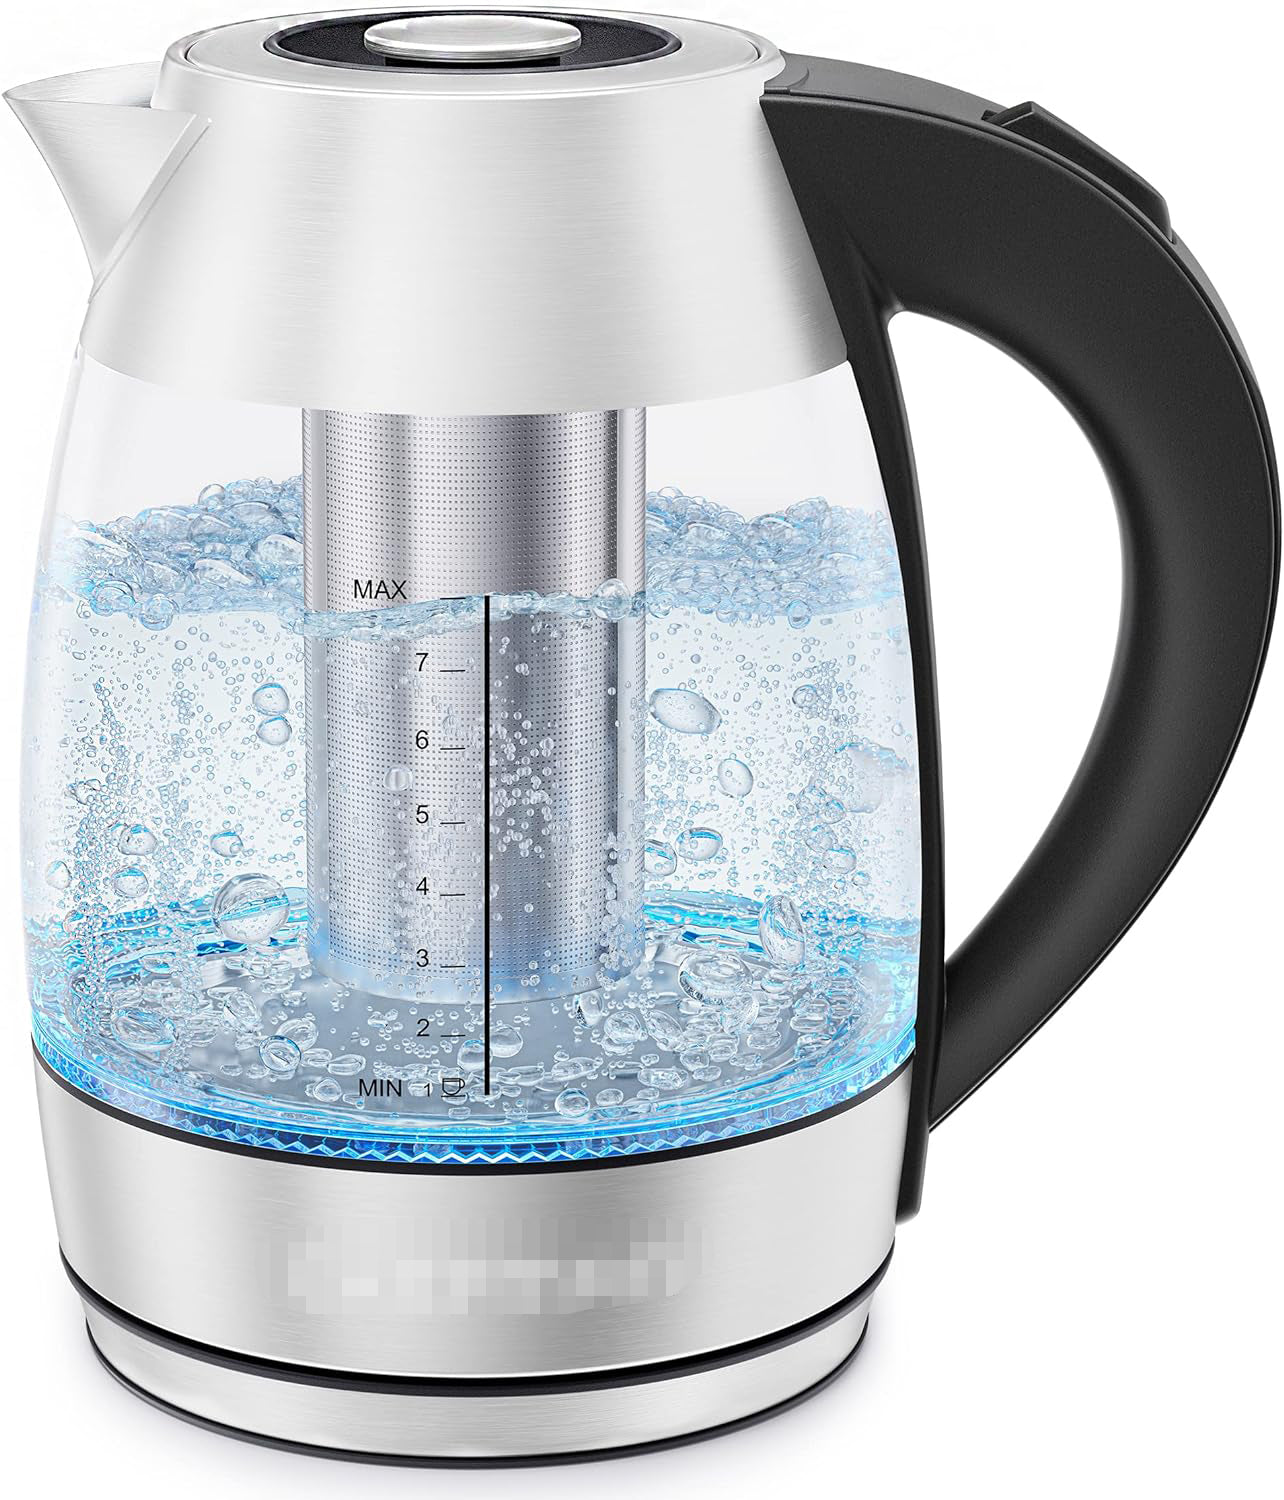 Stainless Steel Glass Electric Kettle with Tea Infuser, LED, Cordless, Auto Shut-Off